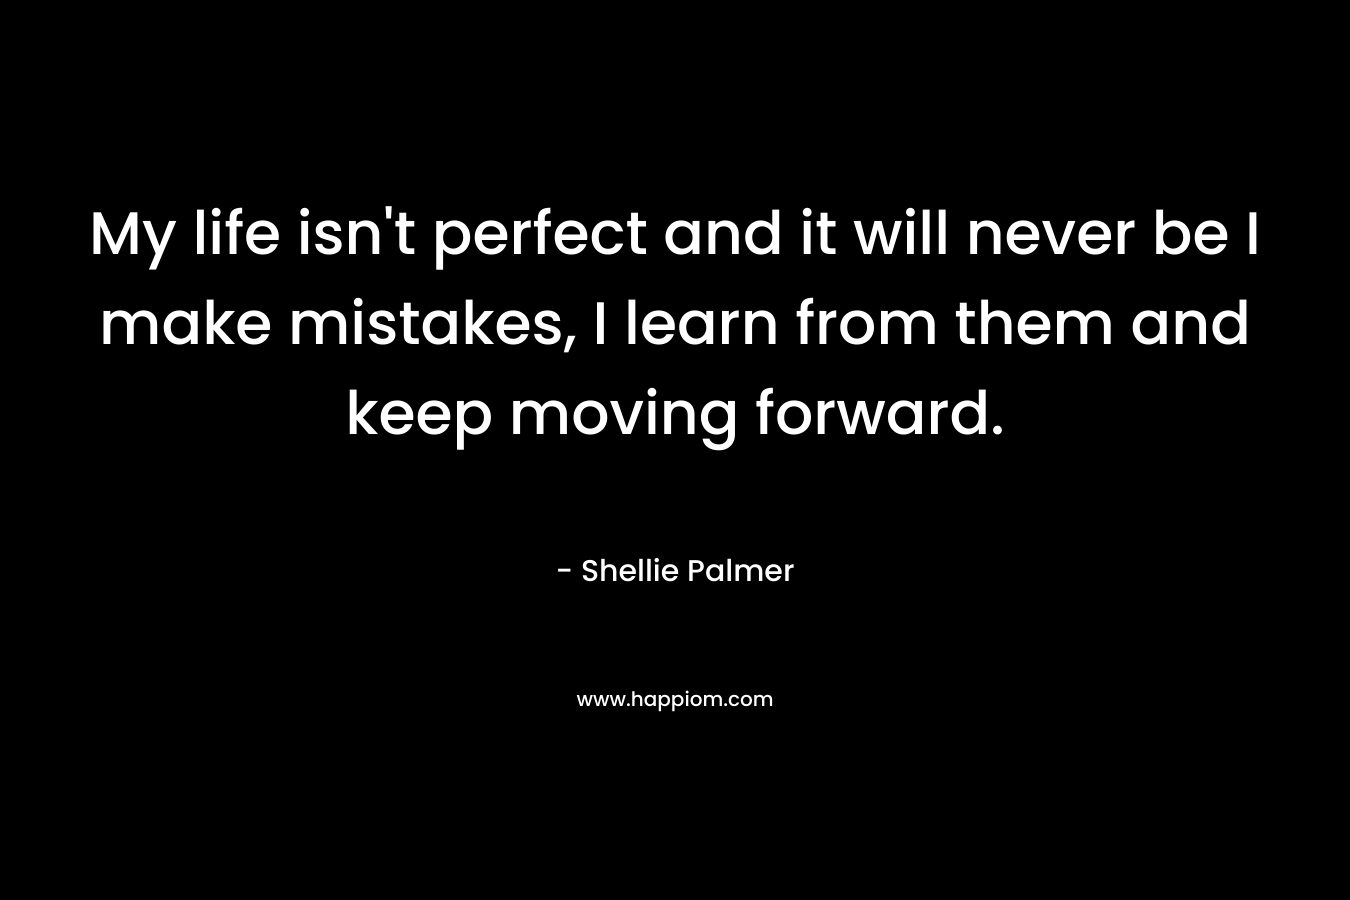 My life isn't perfect and it will never be I make mistakes, I learn from them and keep moving forward.